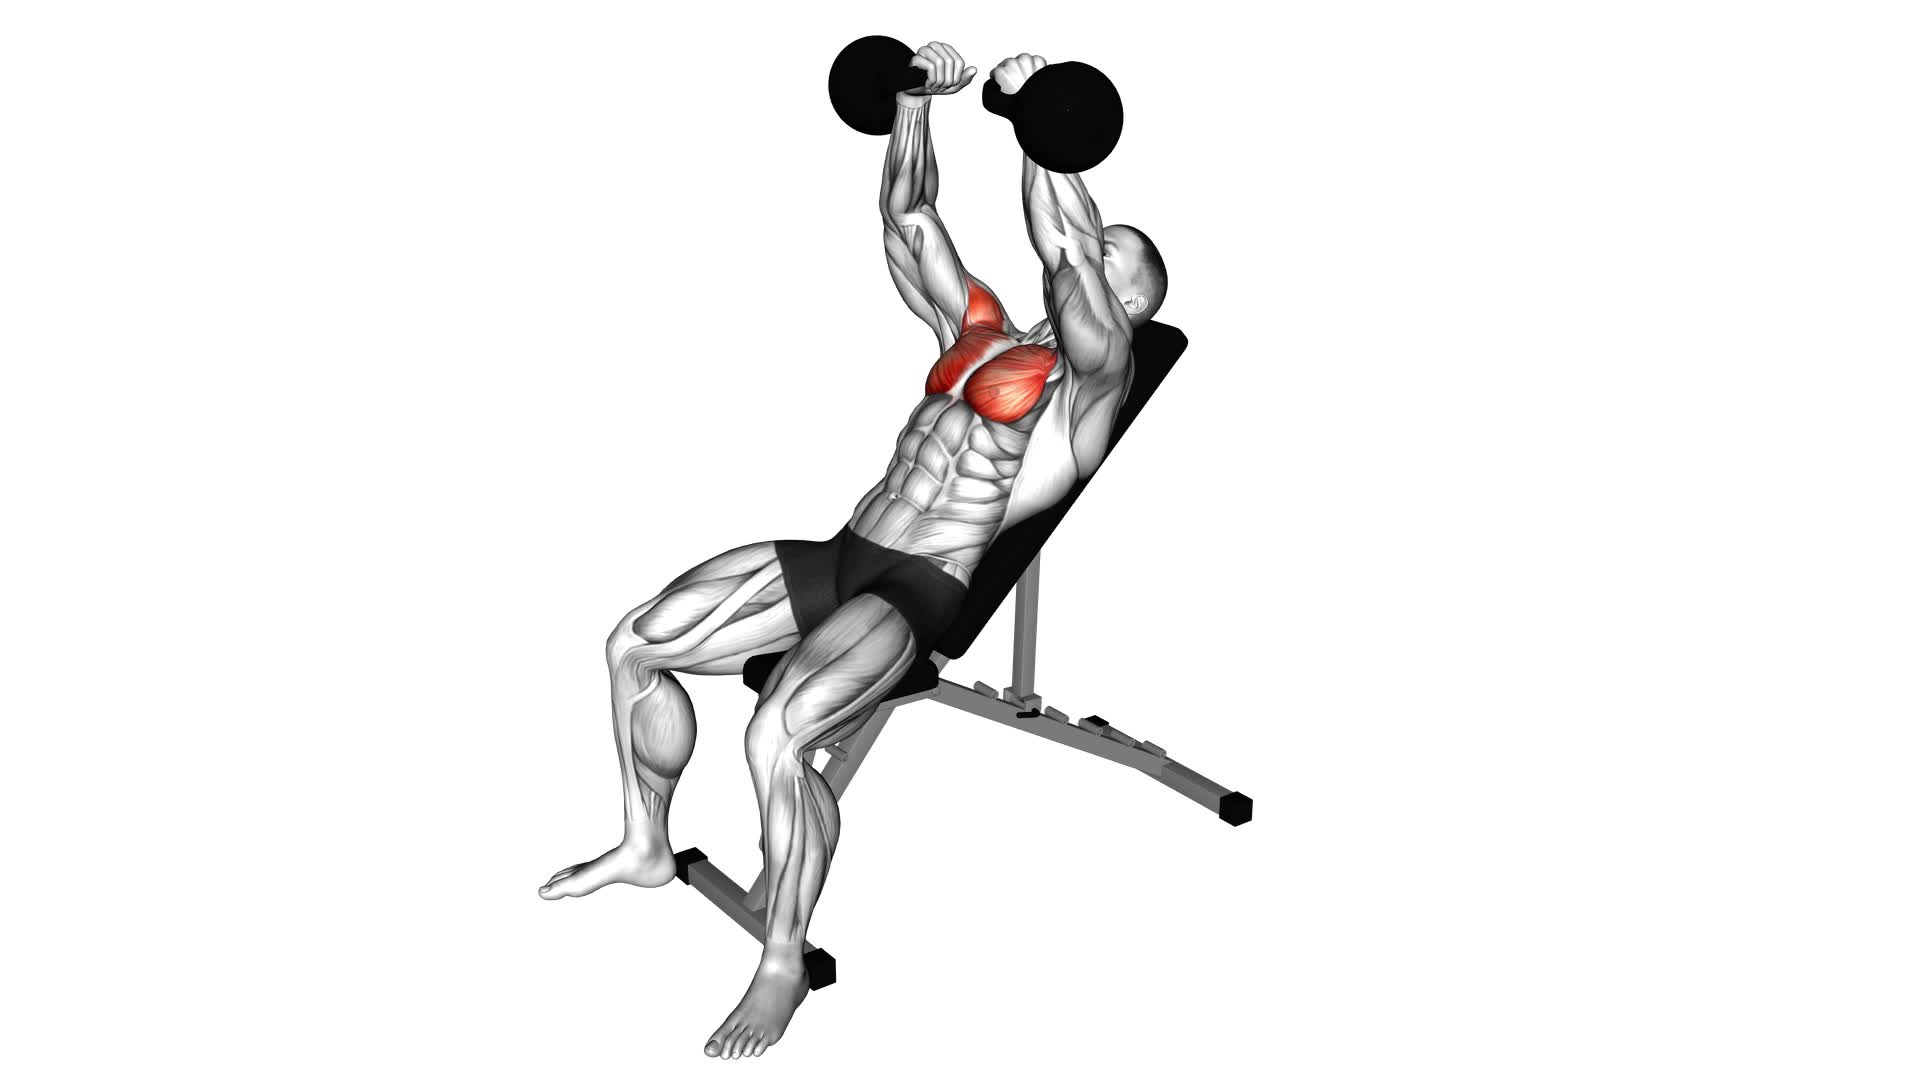 Kettlebell Incline Fly - Video Exercise Guide & Tips